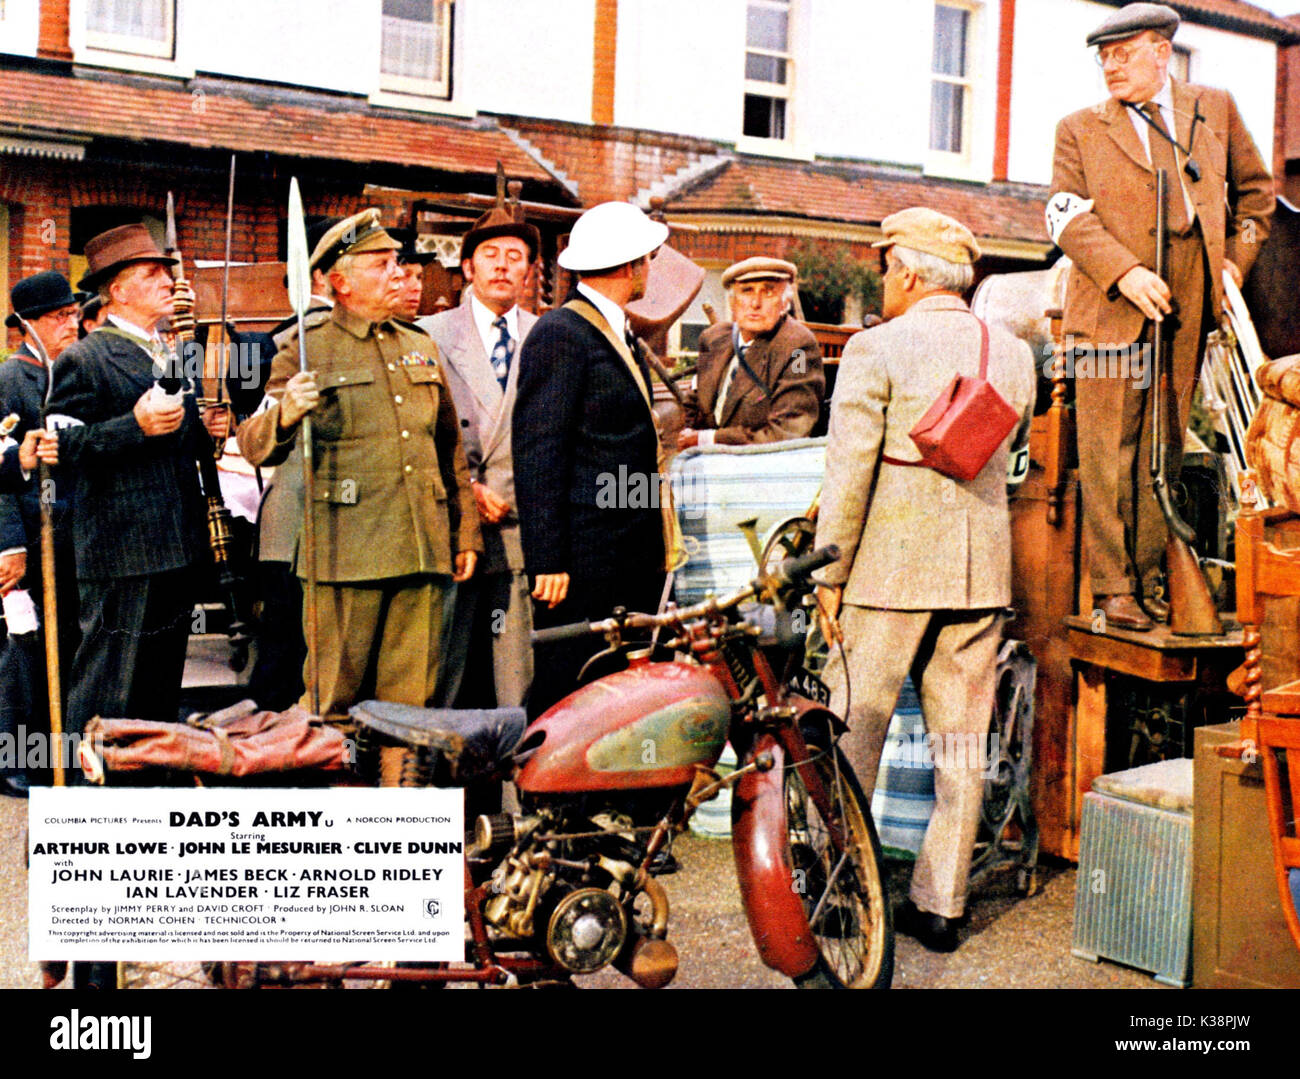 DAD'S ARMY [BR 1971]  [L-R] [?], CLIVE DUNN, JAMES BECK, BILL PERTWEE [with back to camera], JOHN LAURIE, JOHN LE MESURIER [with back to camera], ARTHUR LOWE Stock Photo